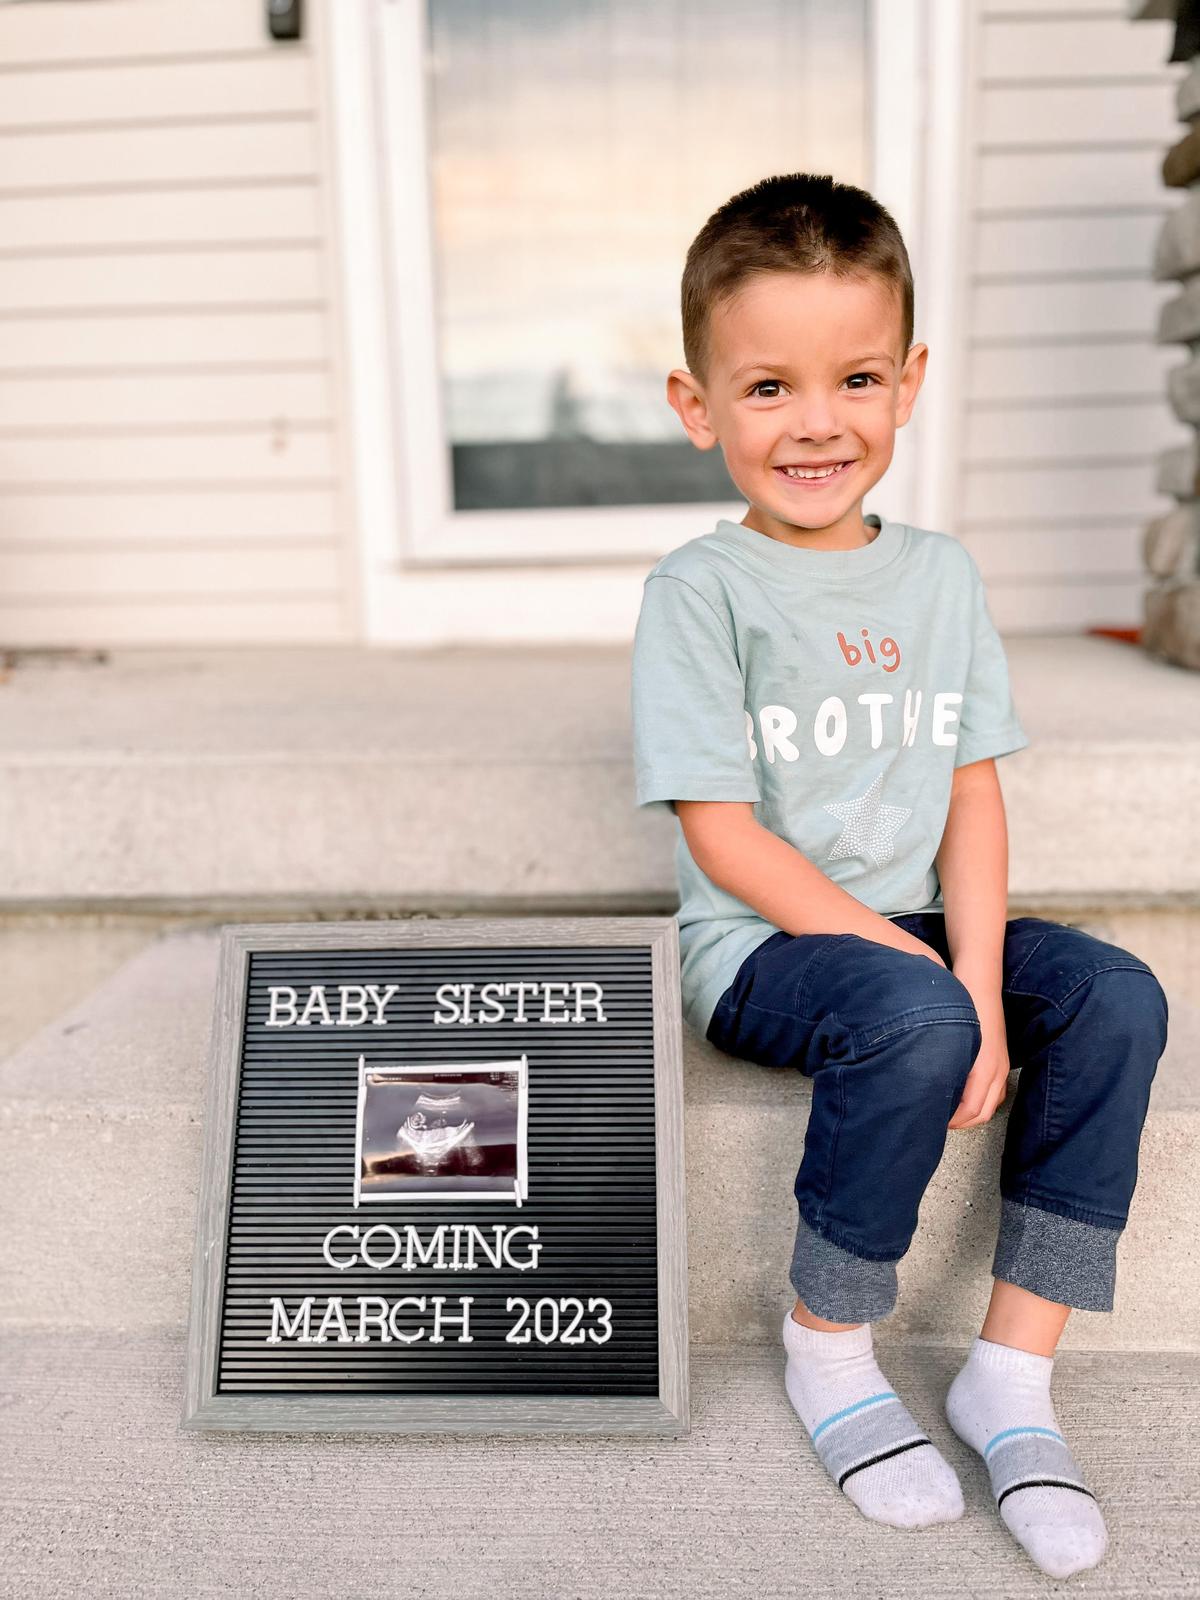 Big brother Cameron is excited to welcome his baby sister. (Courtesy of Carolyn Clark)